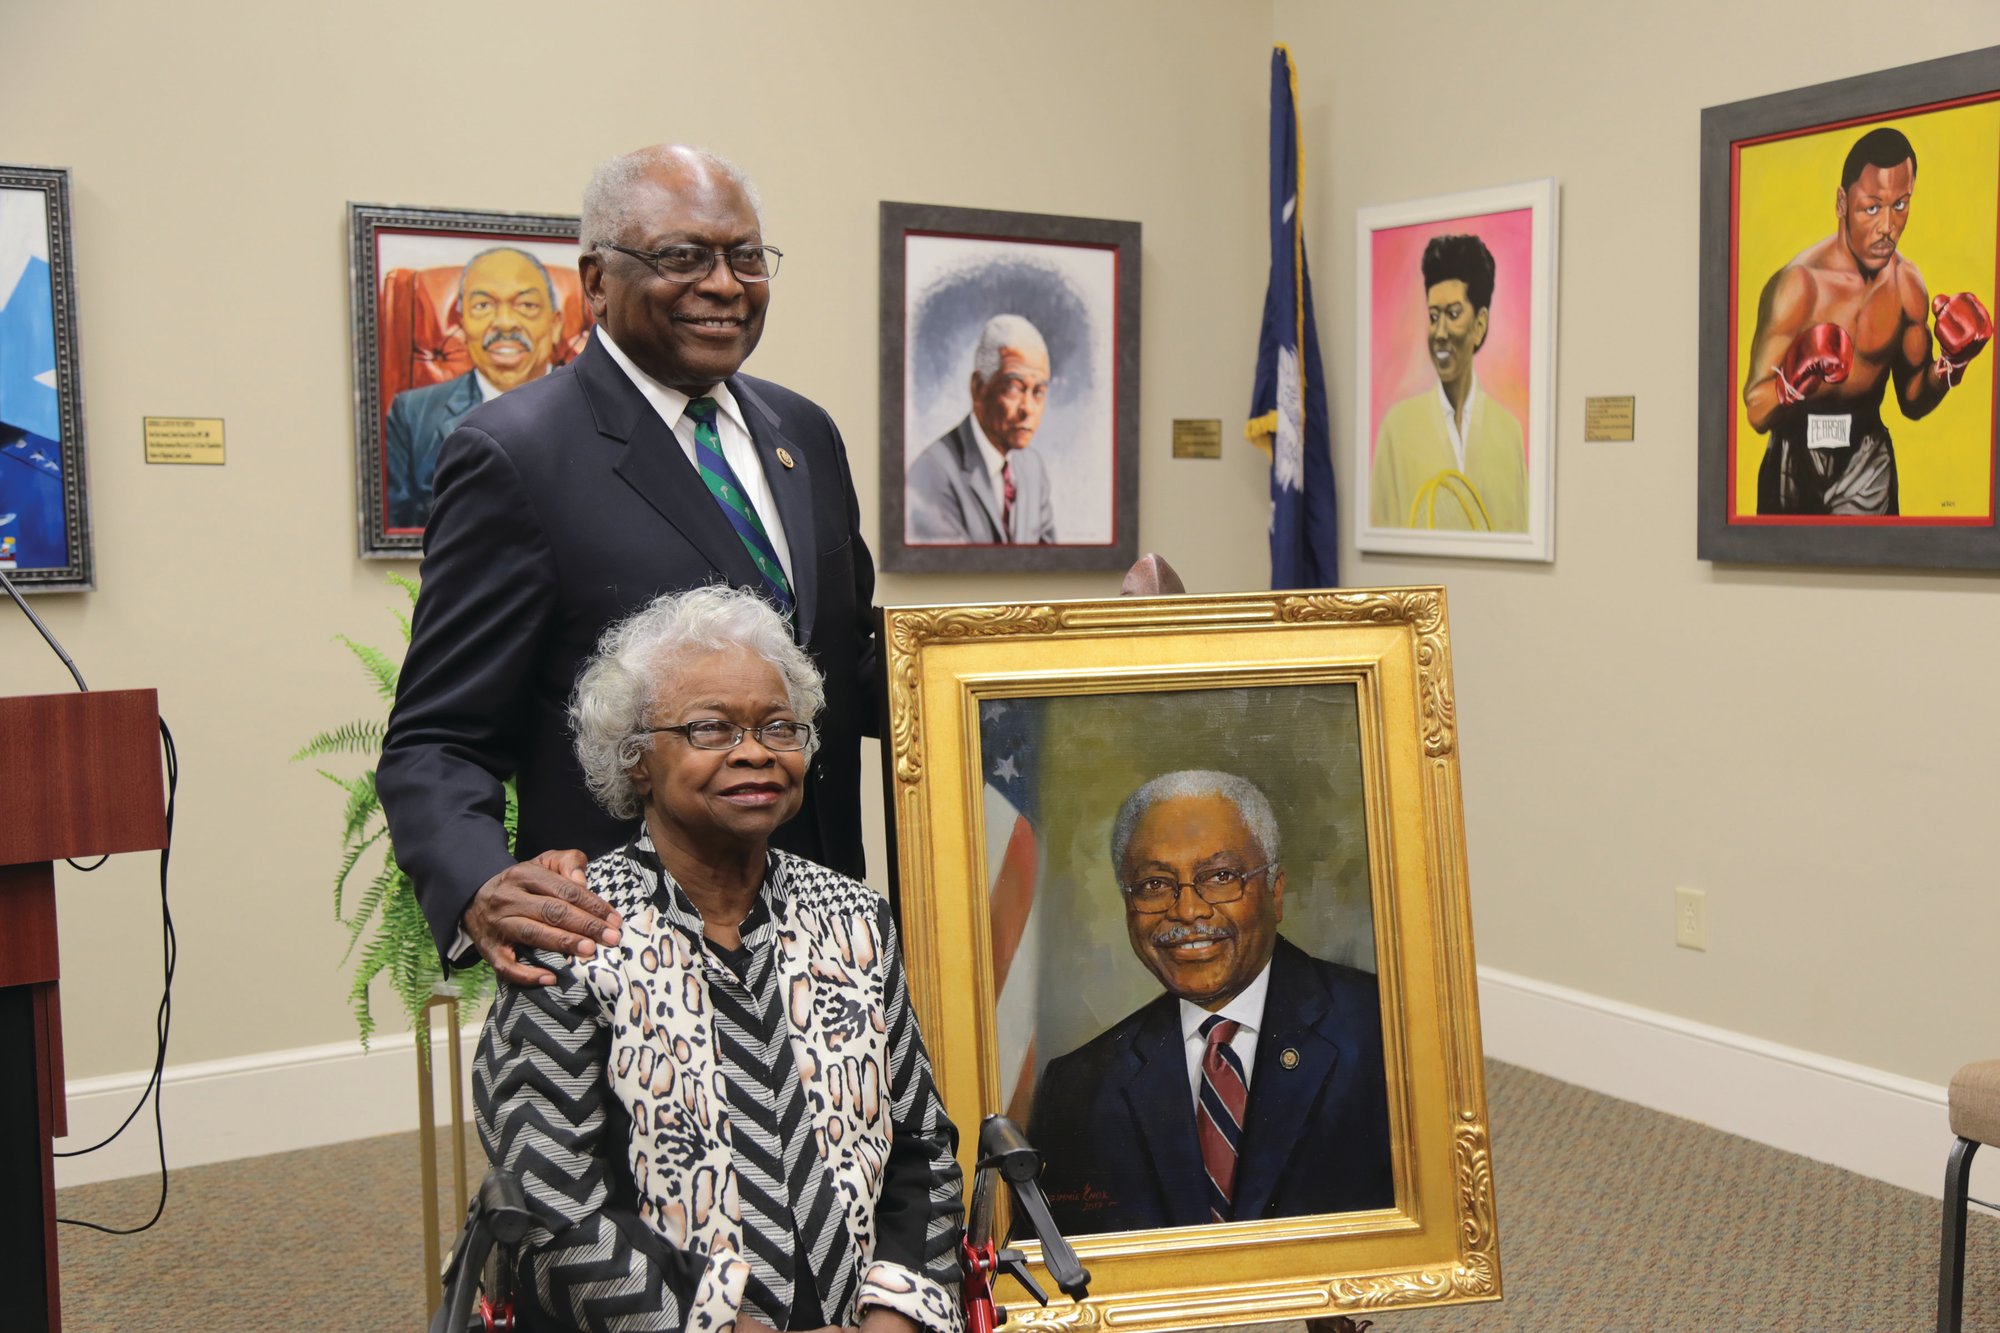 Wife of Rep. Clyburn dies, remembered fondly | The Sumter Item